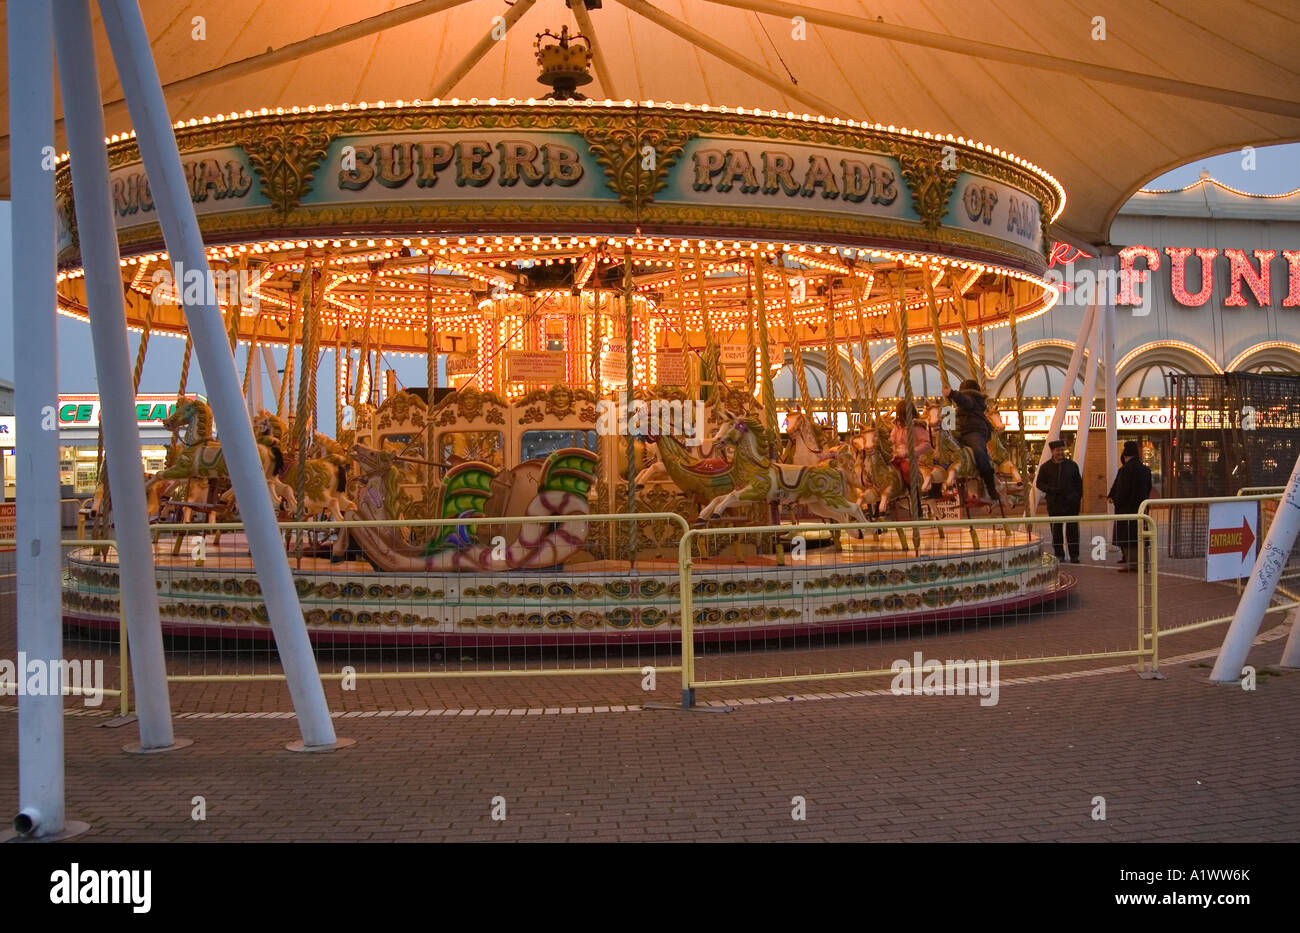 Fairground Gallopers, merry-go-rounds or Horse carousel roundabout Southport, Merseyside, UK Stock Photo